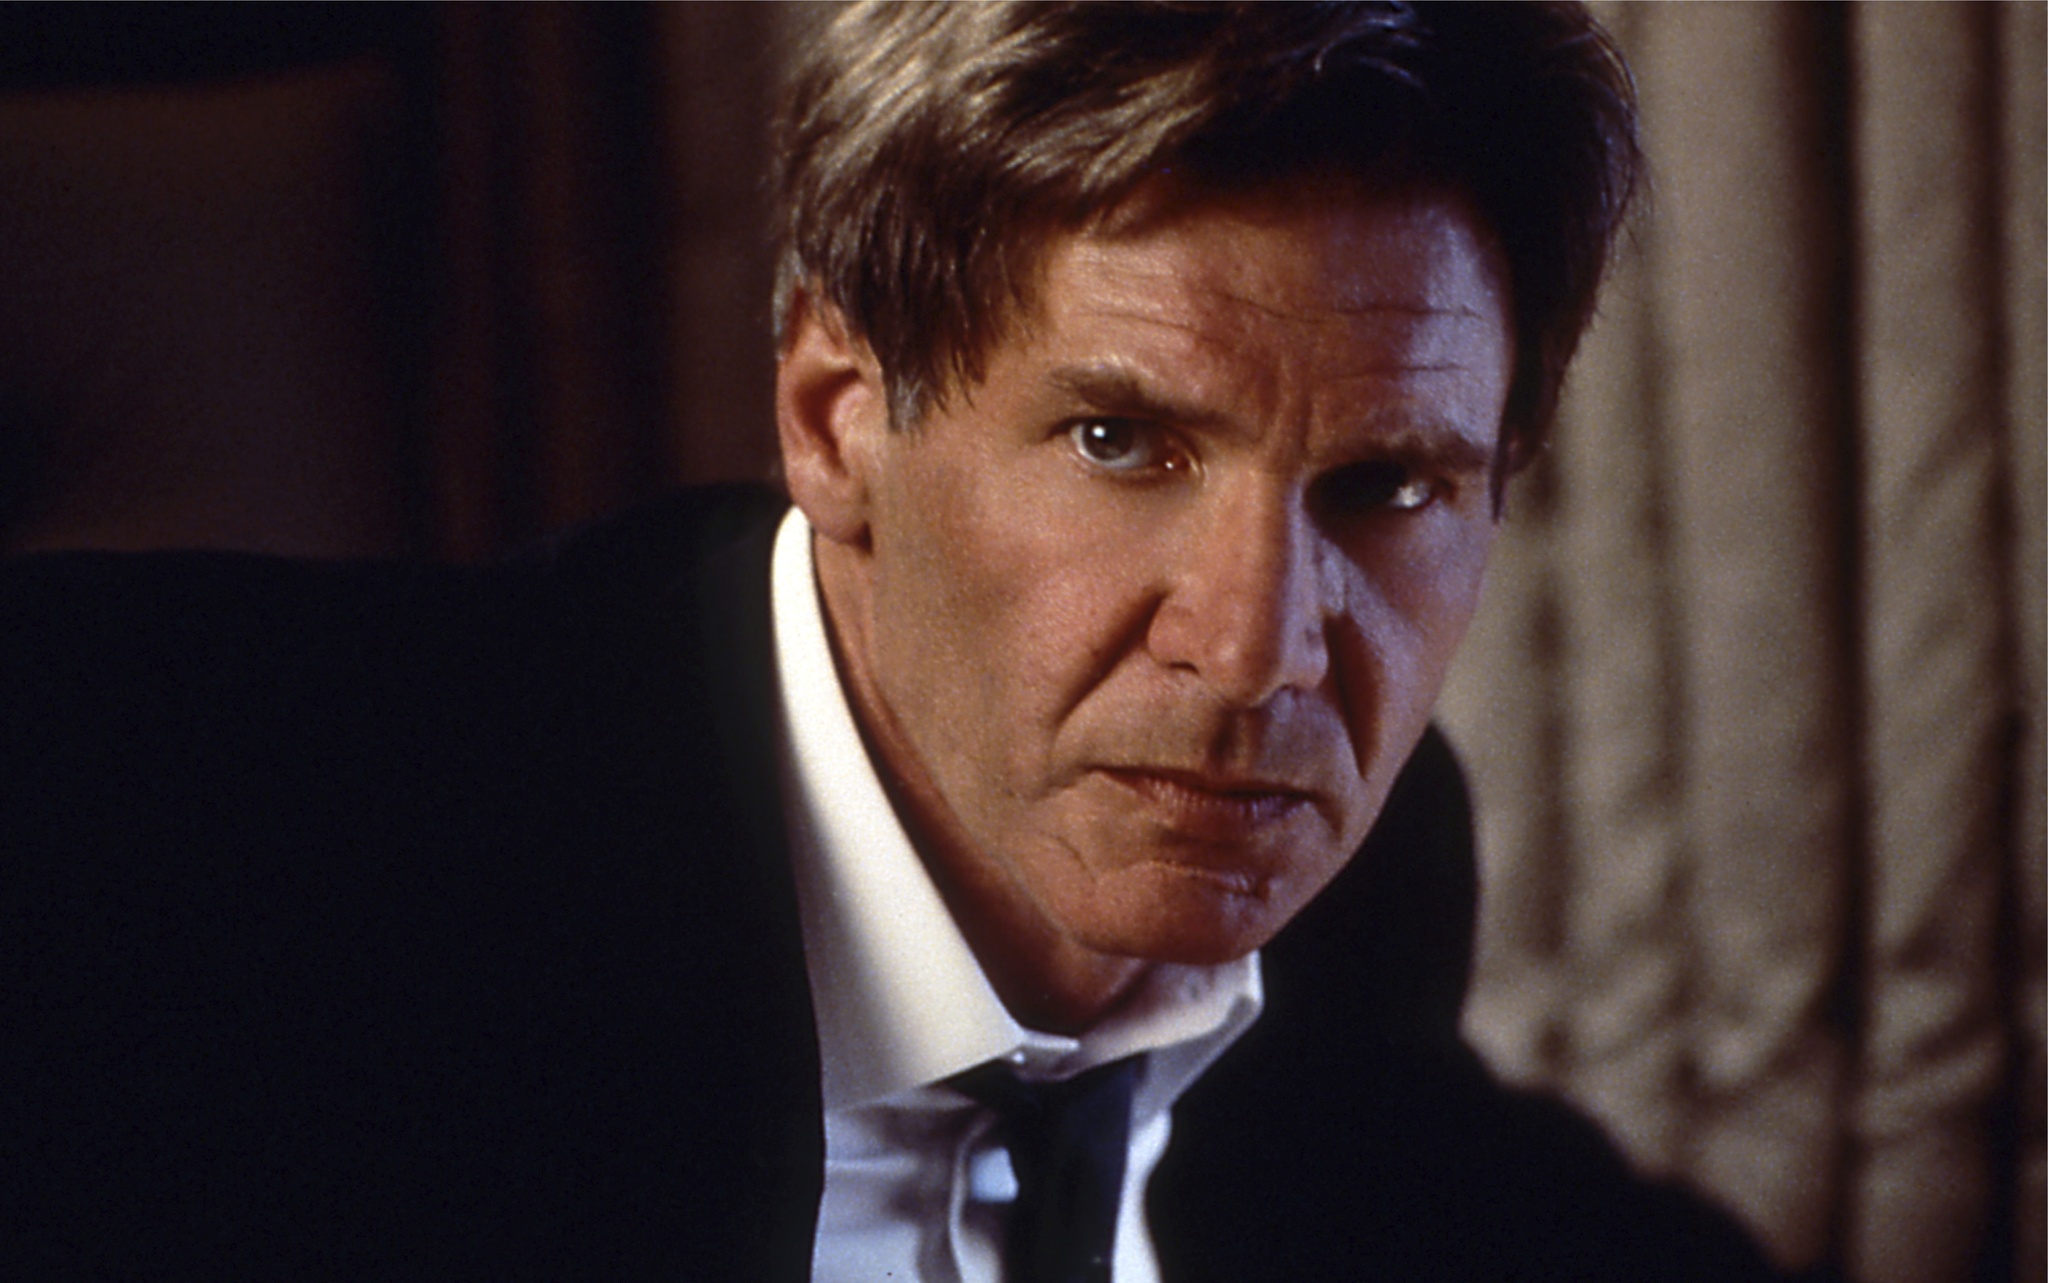 Harrison Ford as President James Marshall in Air Force One